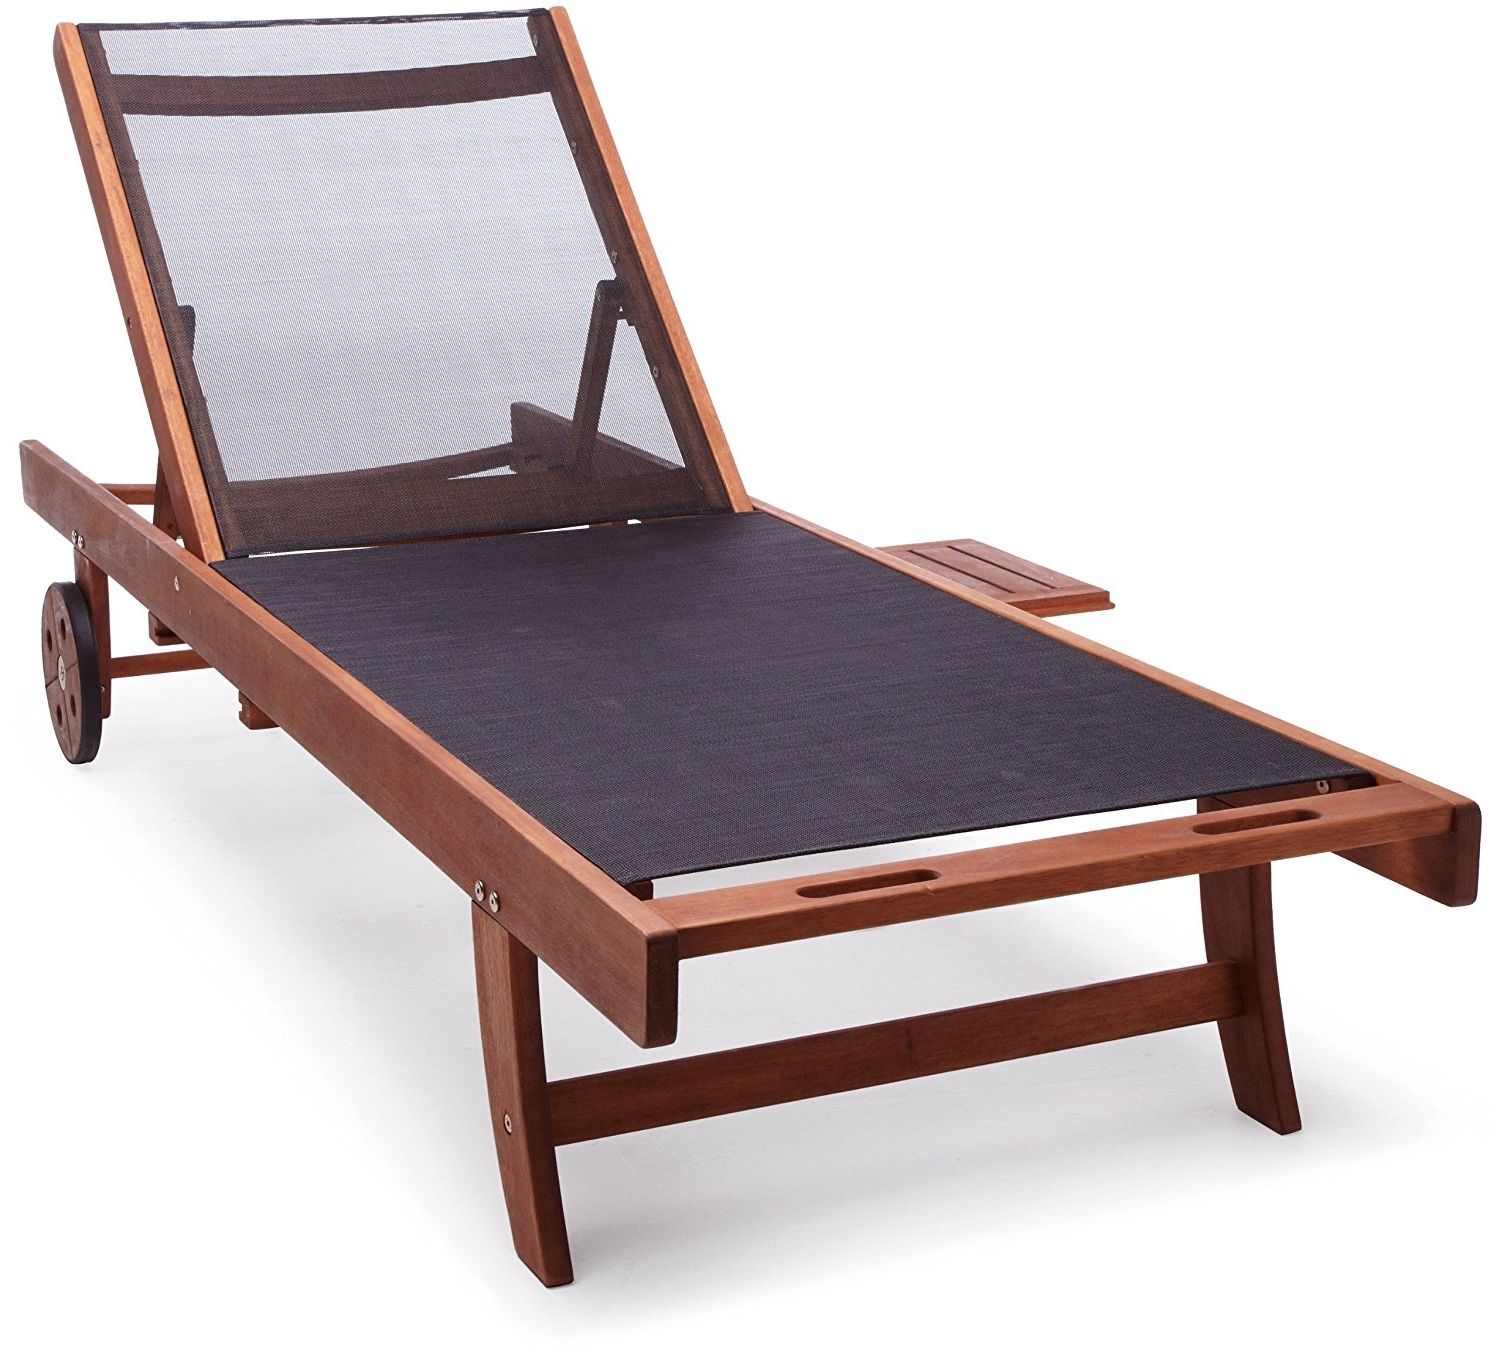 Amazon: Strathwood Basics Chaise Lounge Chair With Textilene With Regard To Famous Fabric Outdoor Chaise Lounge Chairs (View 12 of 15)